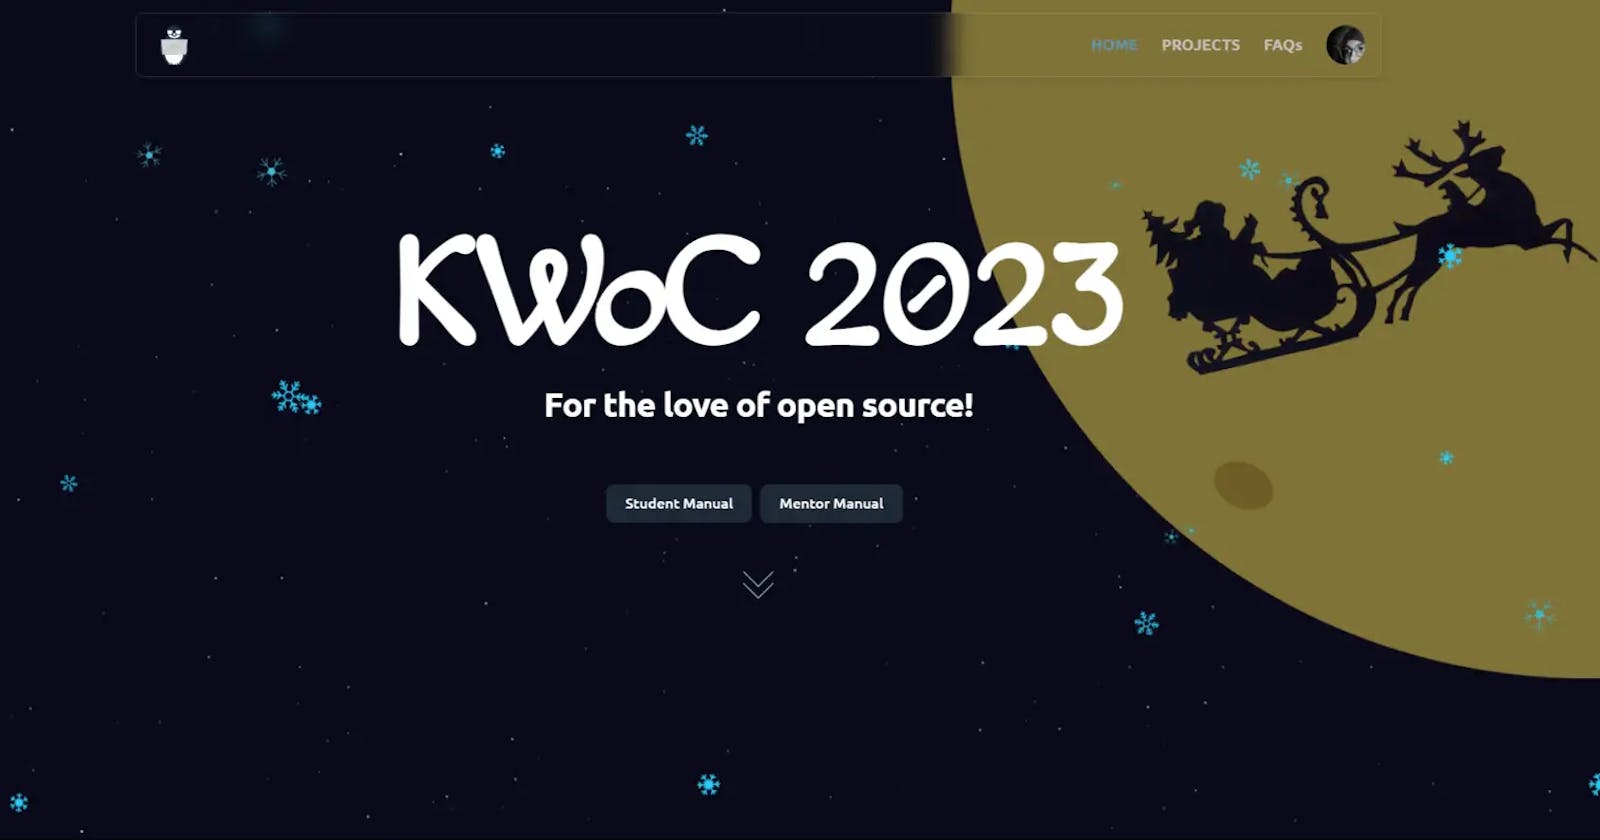 Discover how I conquered the coding challenge at KWoC 2023 Adventure - now it's your turn